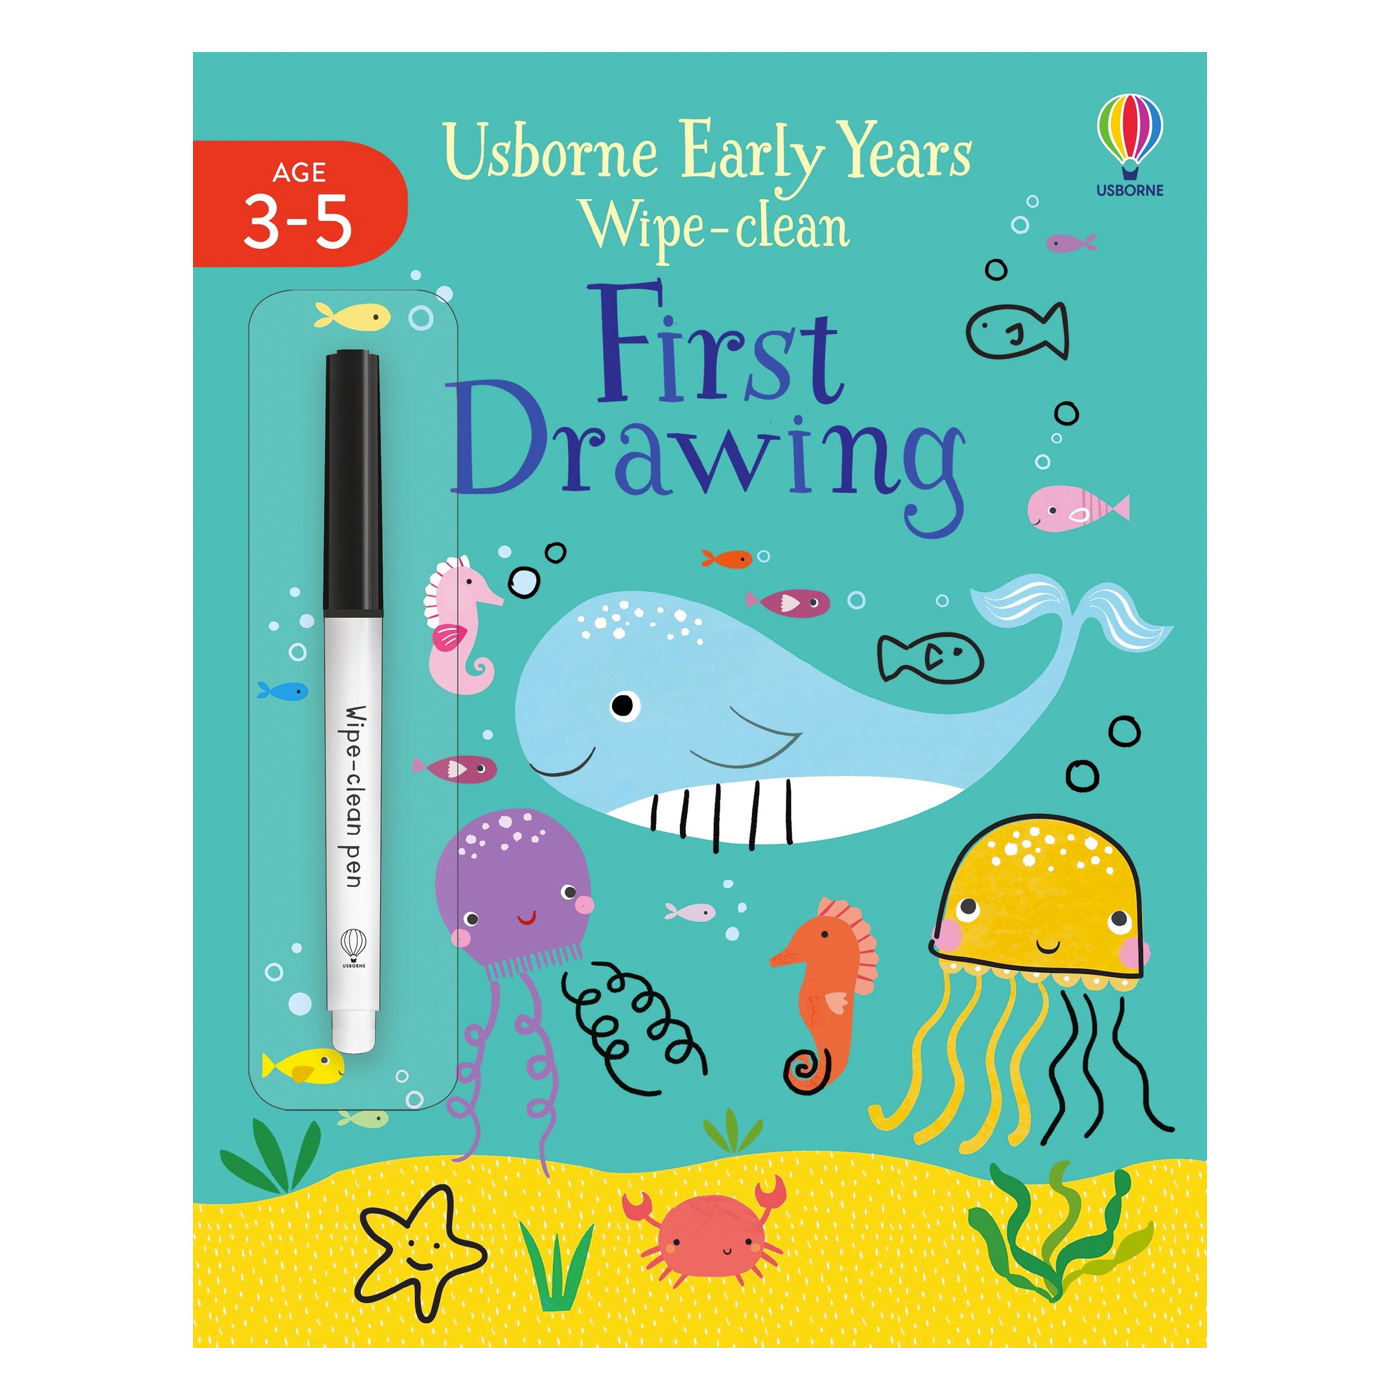 USBORNE Early Years Wipe-Clean First Drawing 3-5